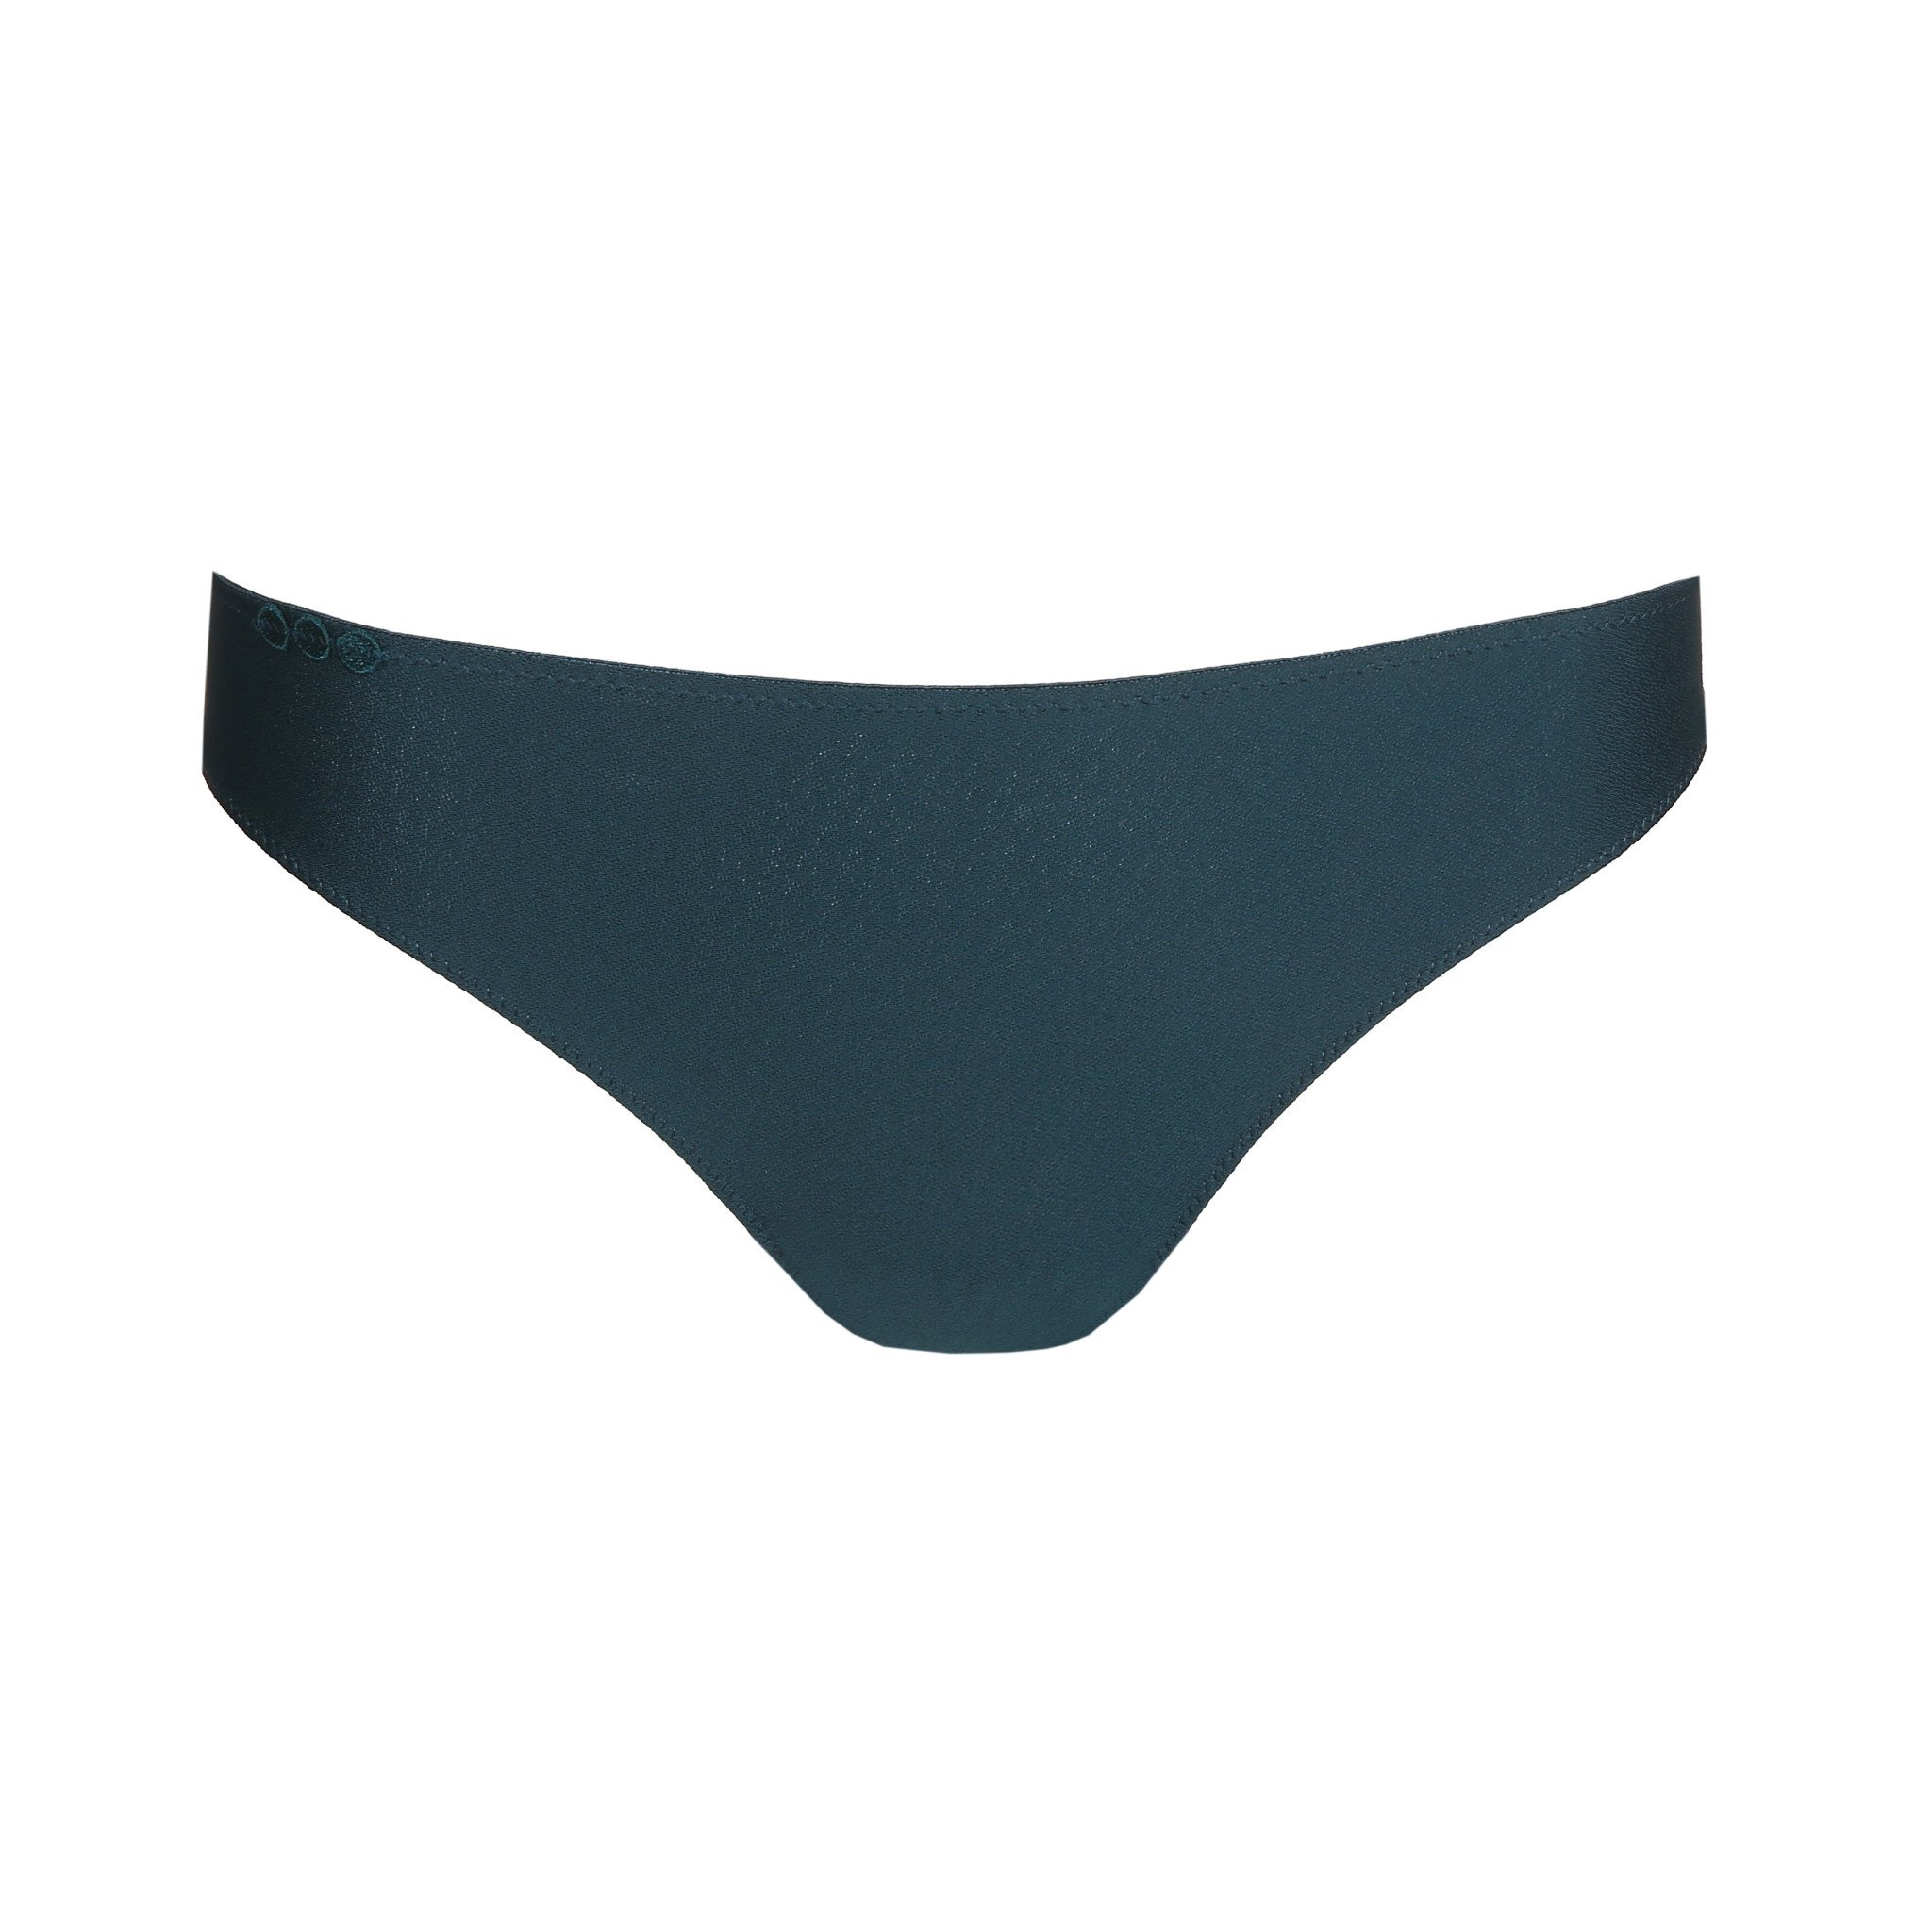 Mario Jo Tom Rio Briefs - Cloud Blue (Limited Edition) – Lily Pad Lingerie